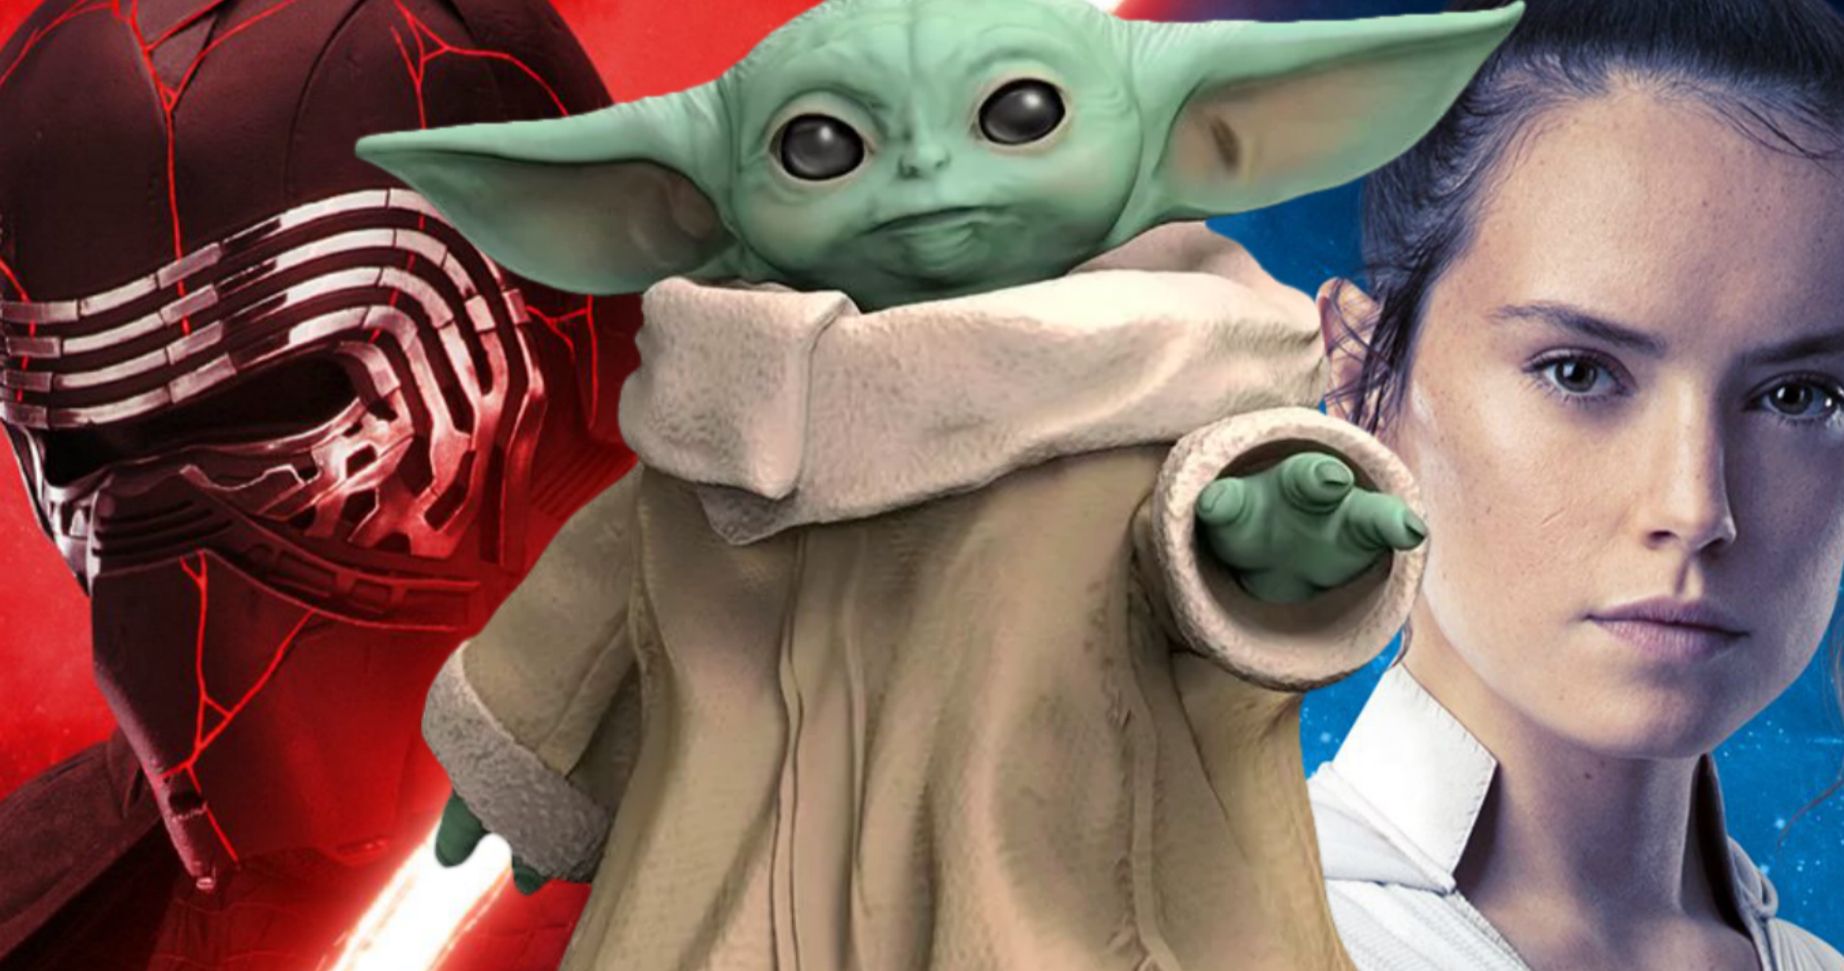 Will Baby Yoda Show Up in Star Wars 9?